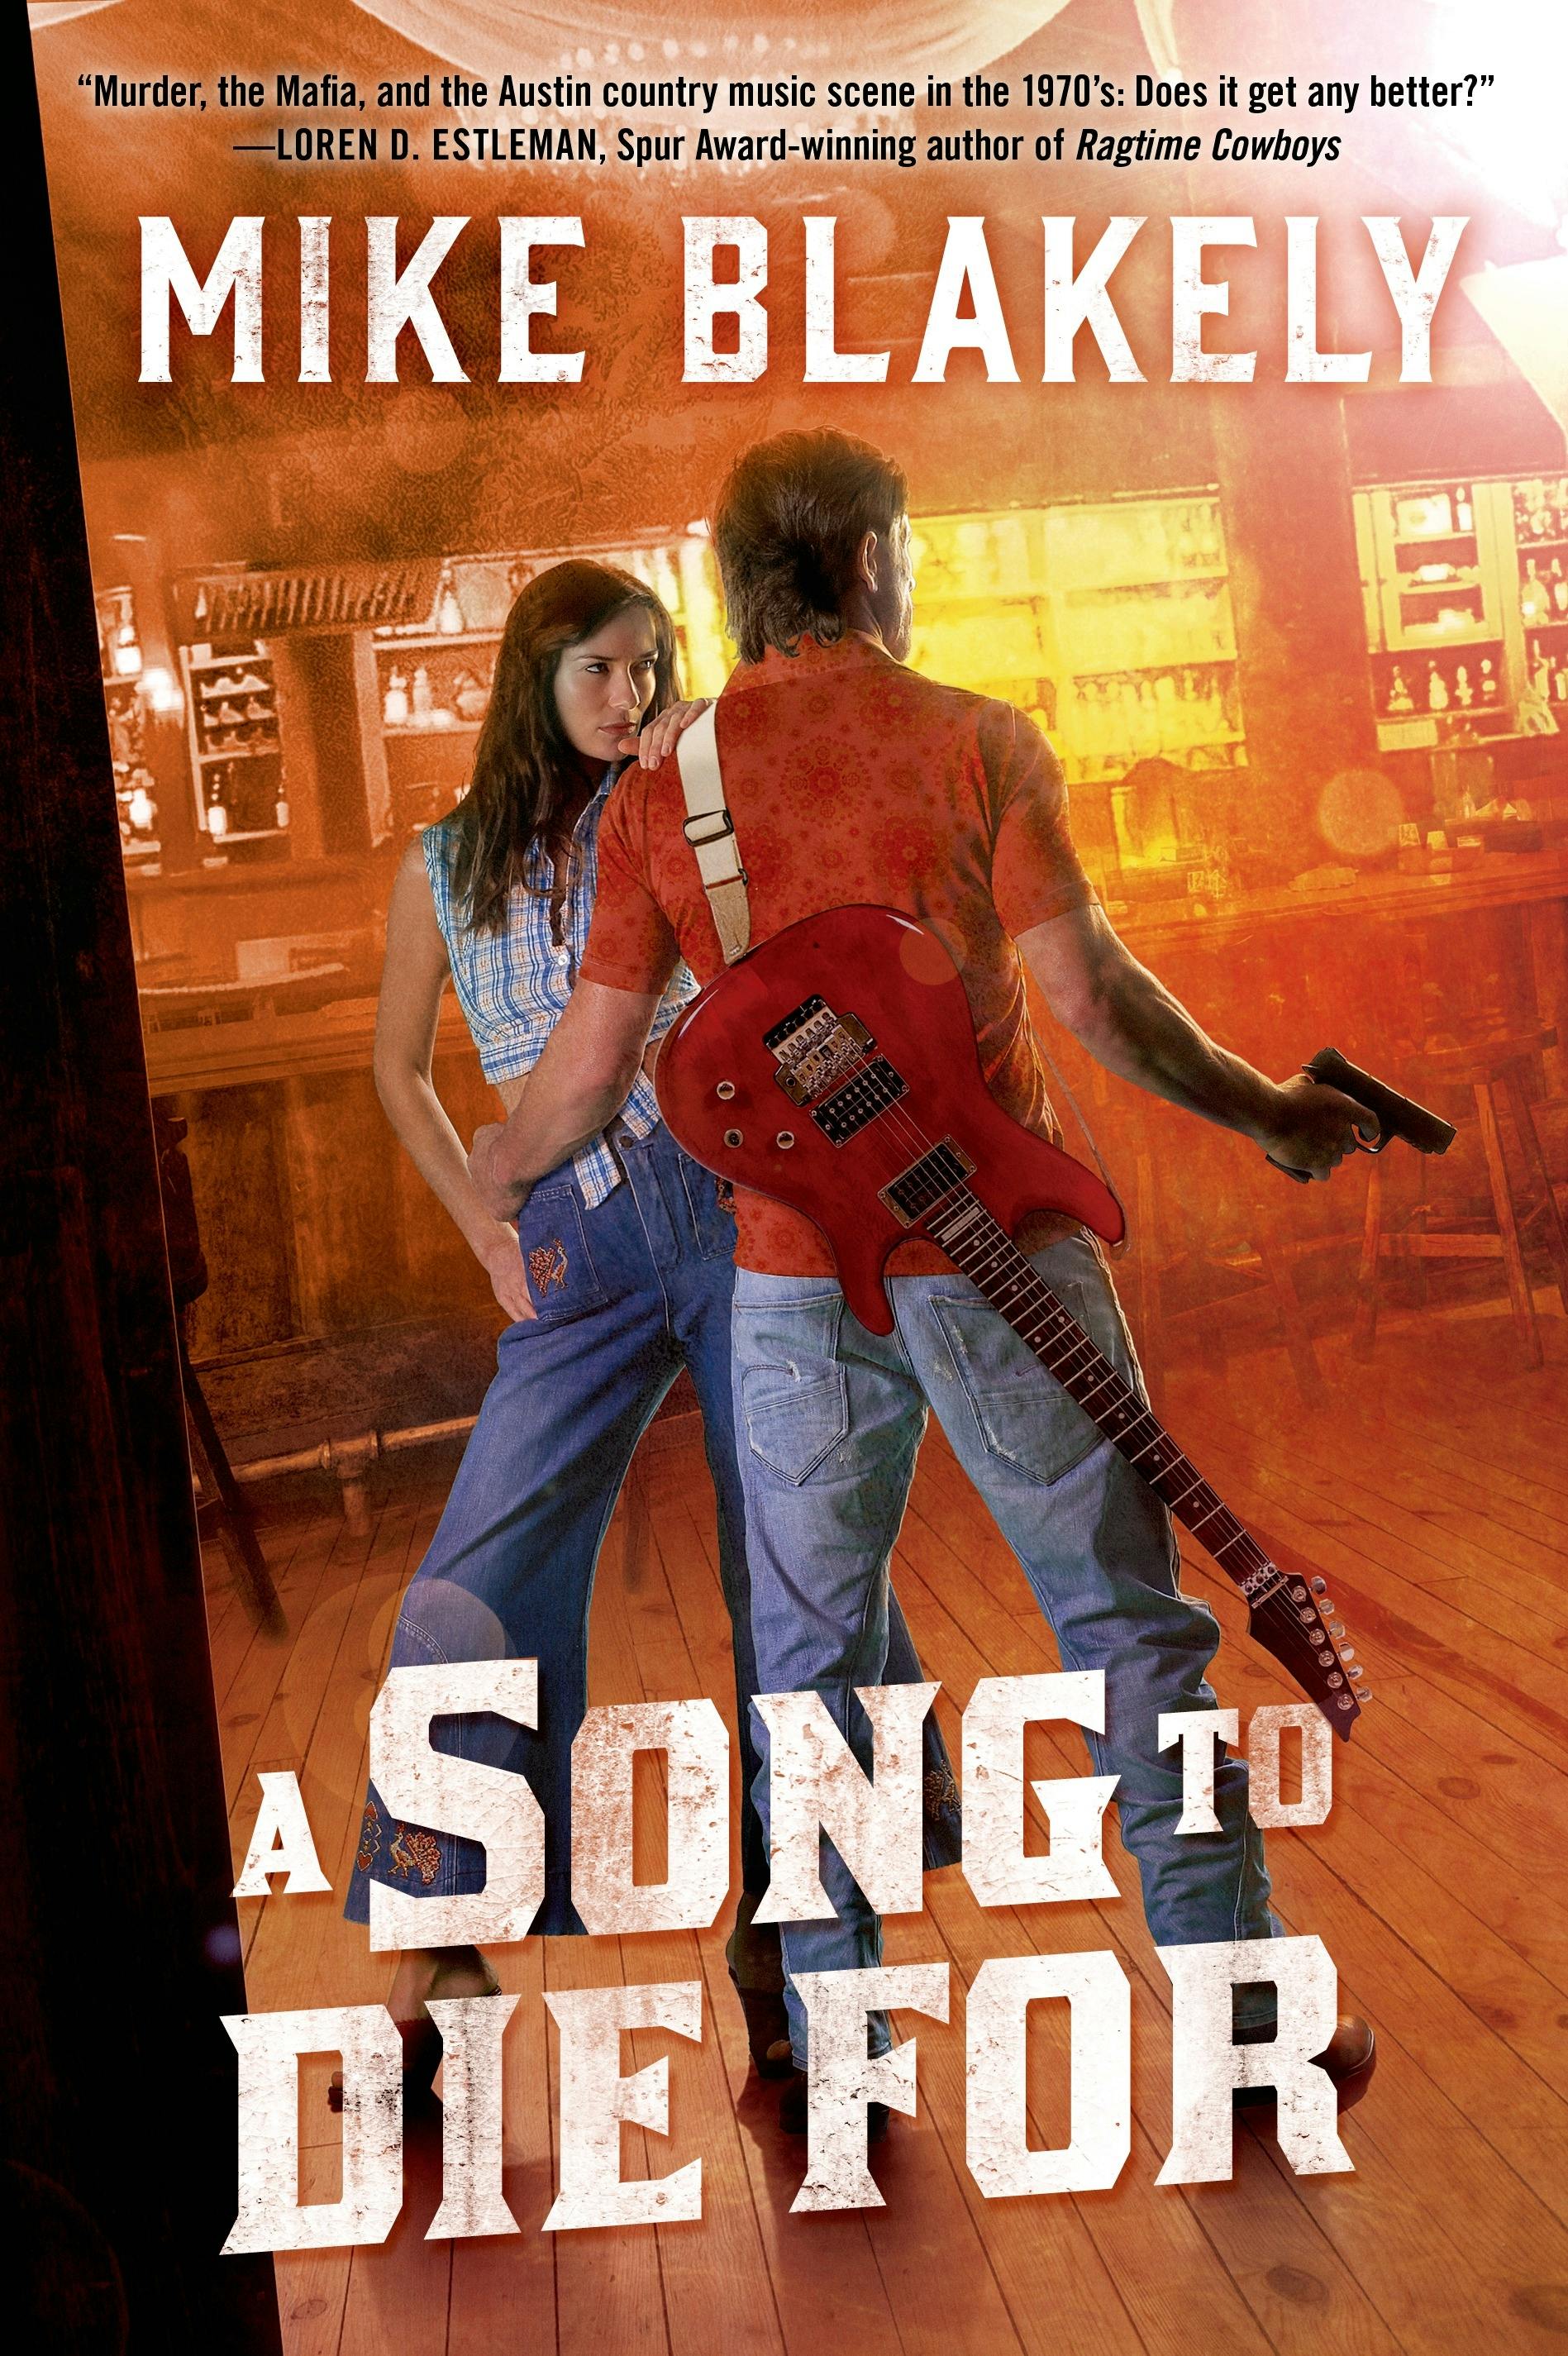 Cover for the book titled as: A Song to Die For